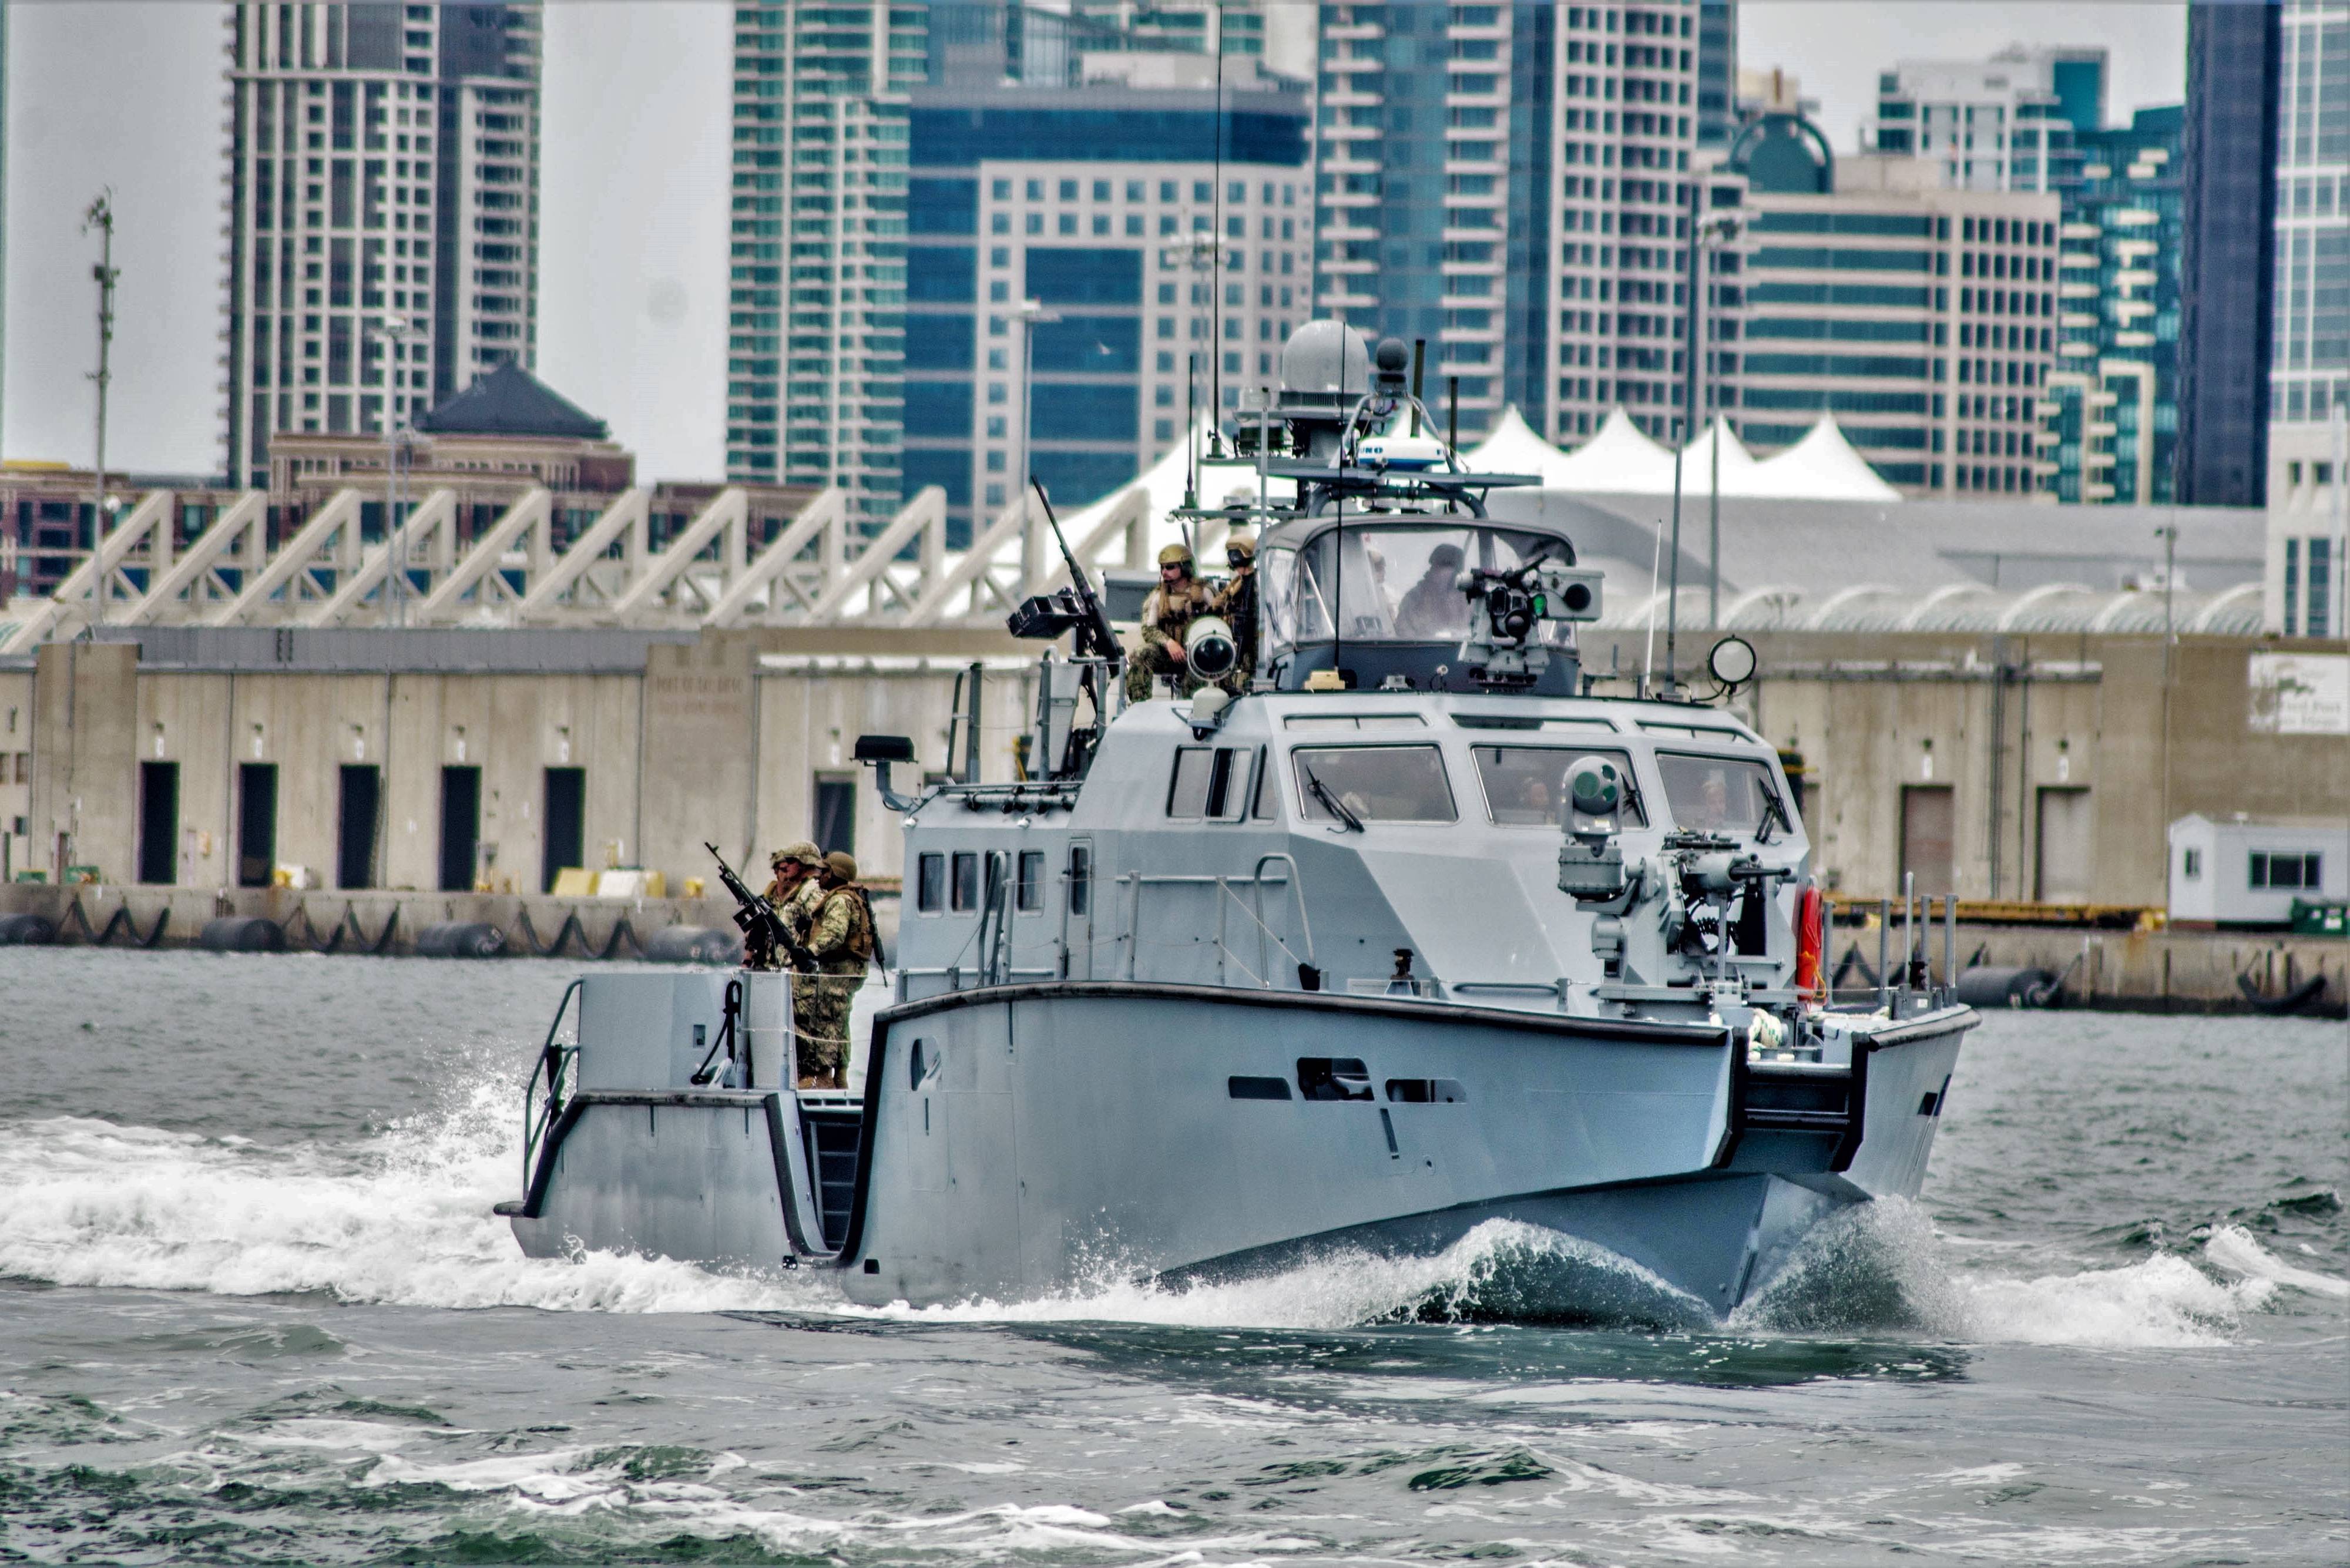 US Navy Boats for Sale: Find Your Perfect Vessel Today! - News Military